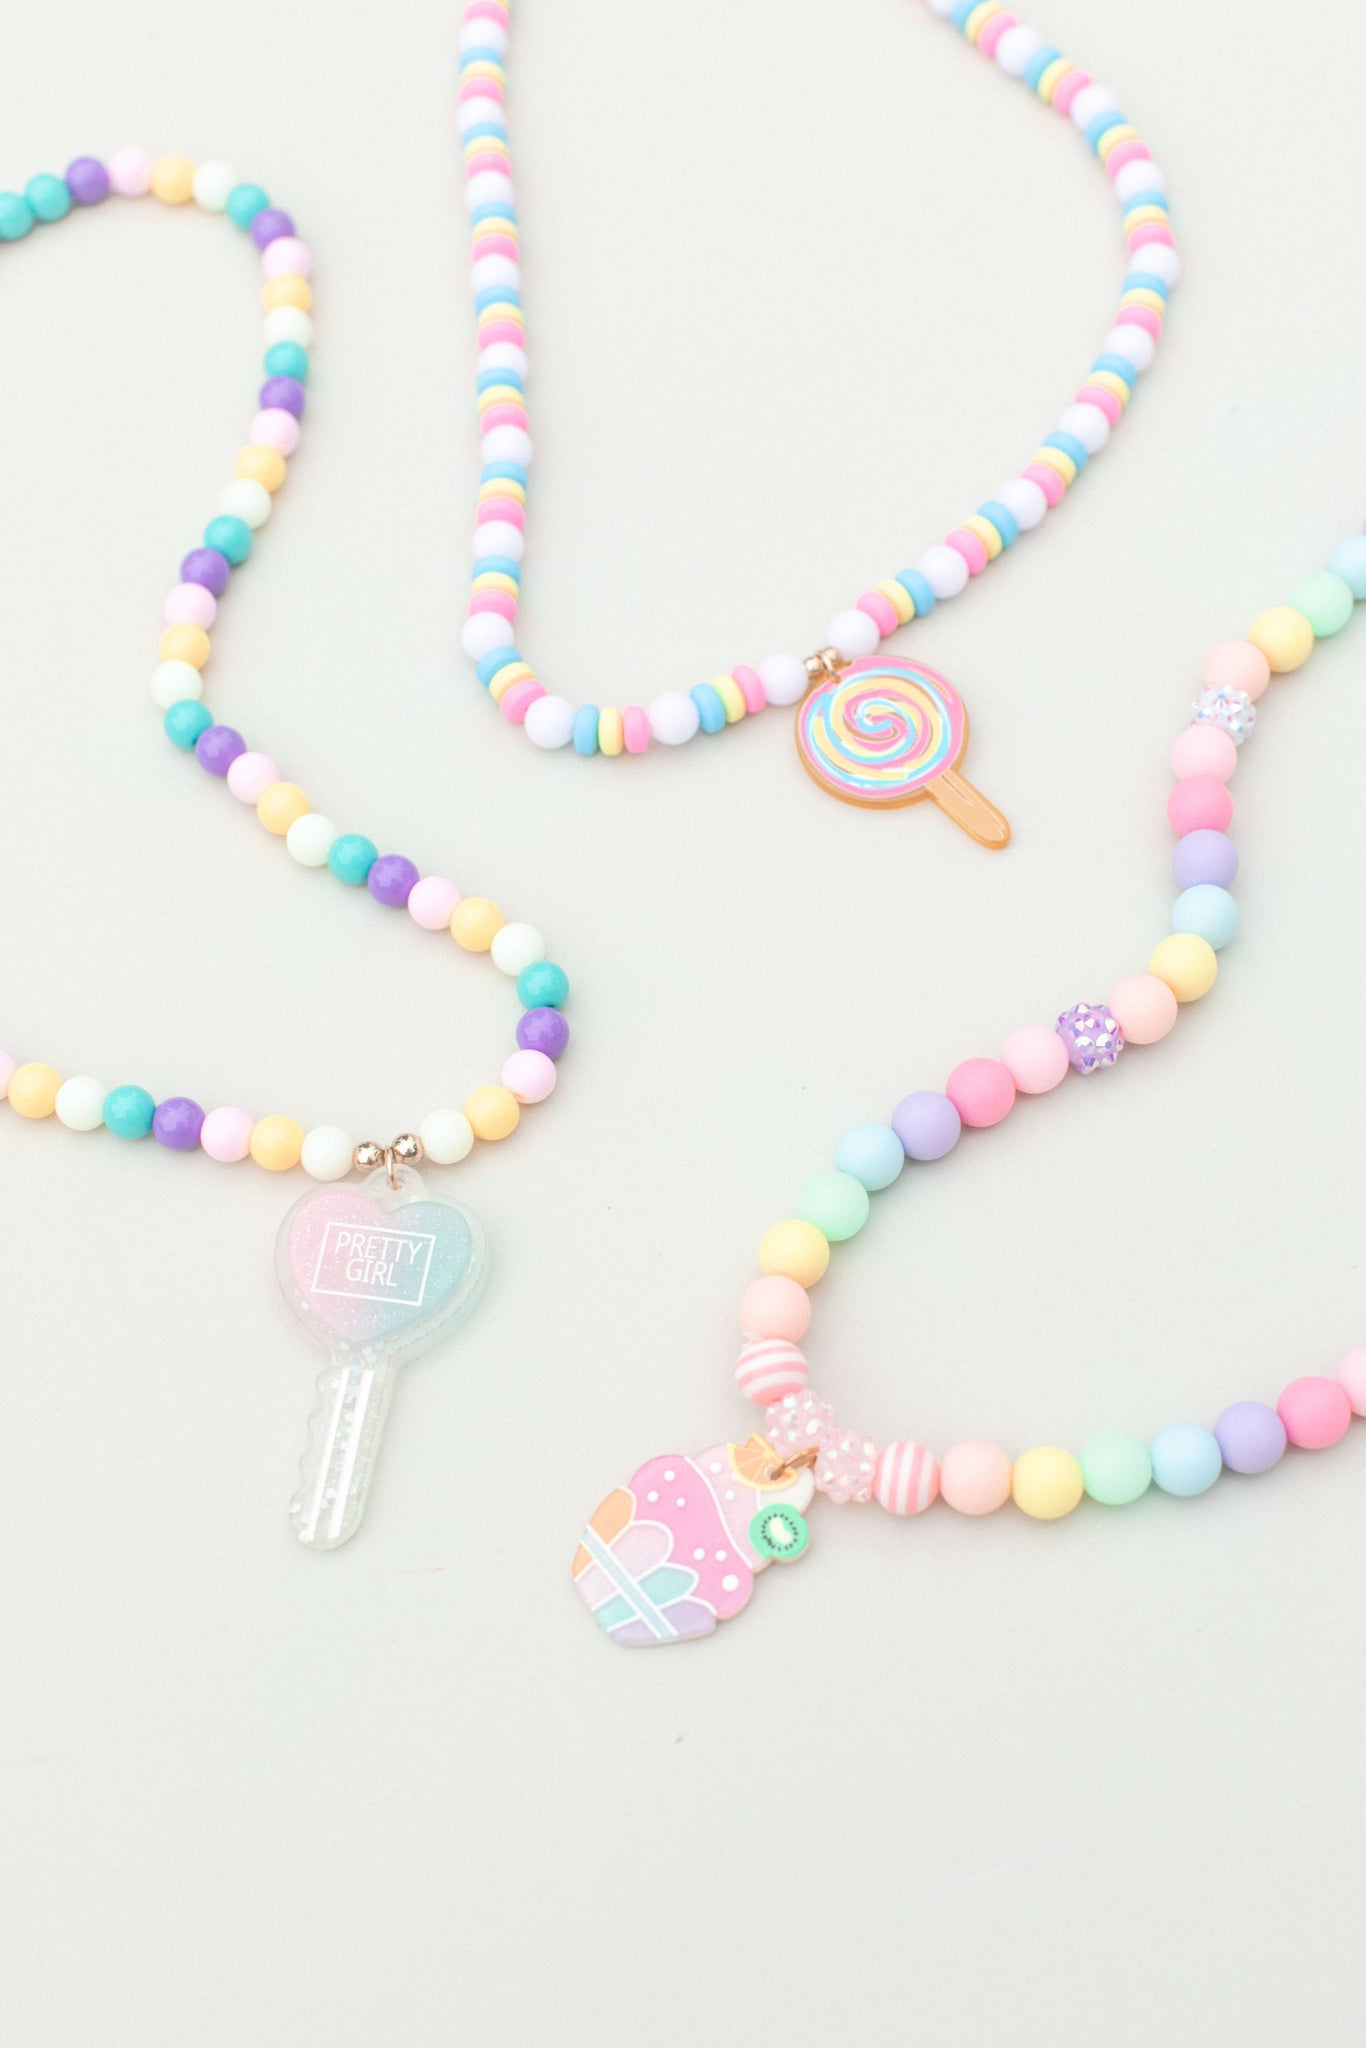 3 Tips for Making More Money Selling Wholesale Beaded Necklaces